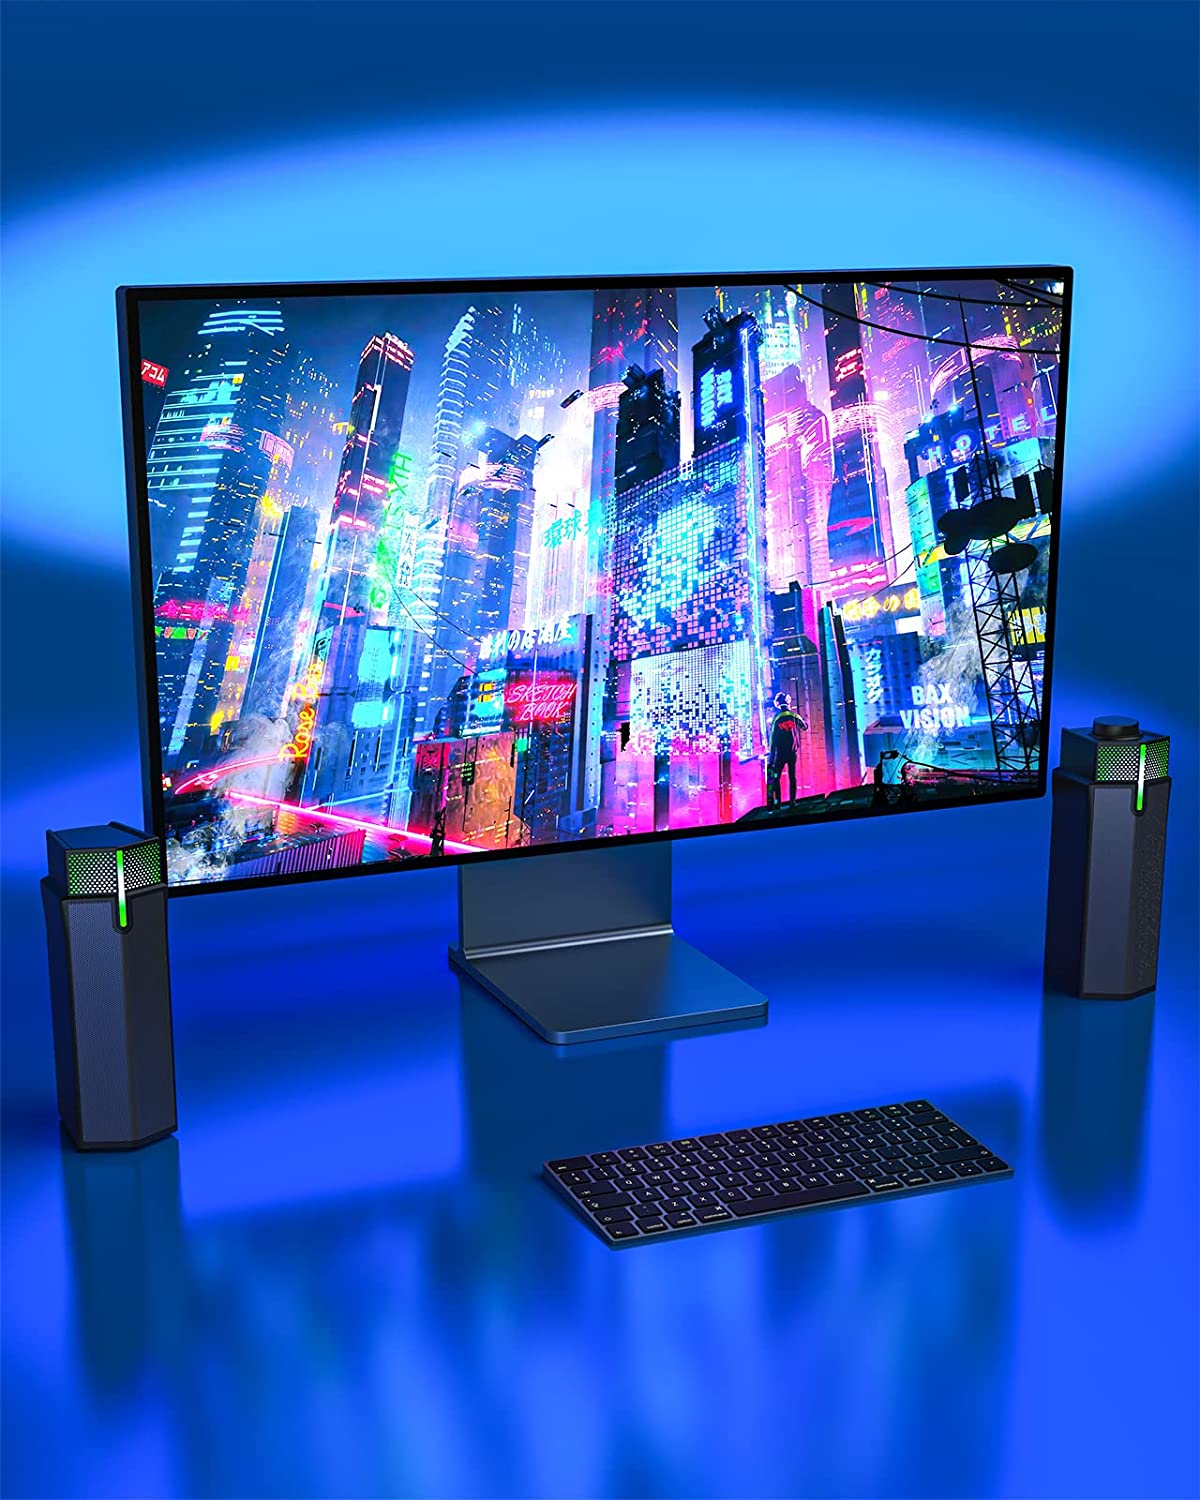 Jeecoo M20 Computer Speakers for PC Desktop Monitor, Bluetooth V5.3 PC  Sound Bar - Wired USB-Powered, Superb Stereo Sound, with Gradient RGB  Lighting